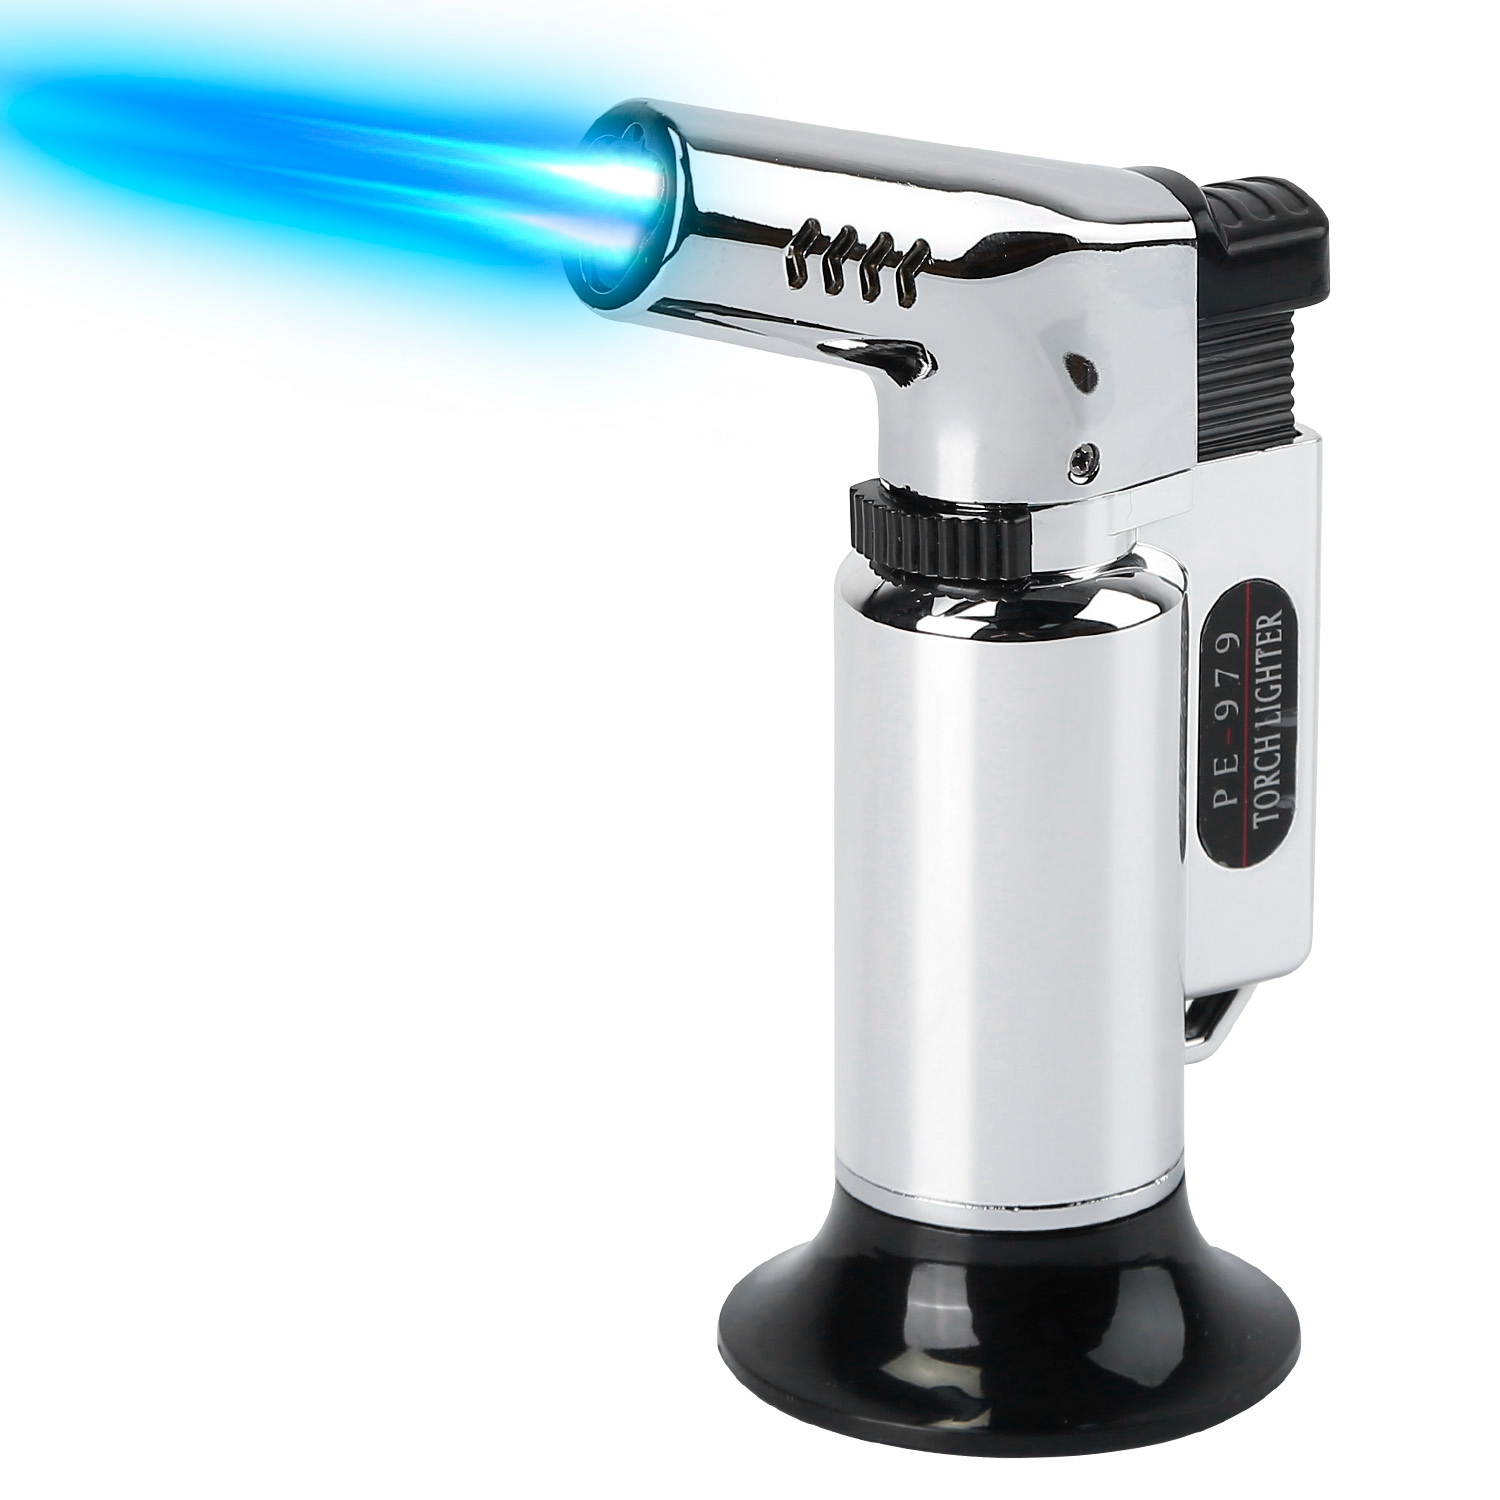 iMounTEK Culinary Butane Torch Lighter Refillable Blow Torch Adjustable Flame Silver - image 1 of 8